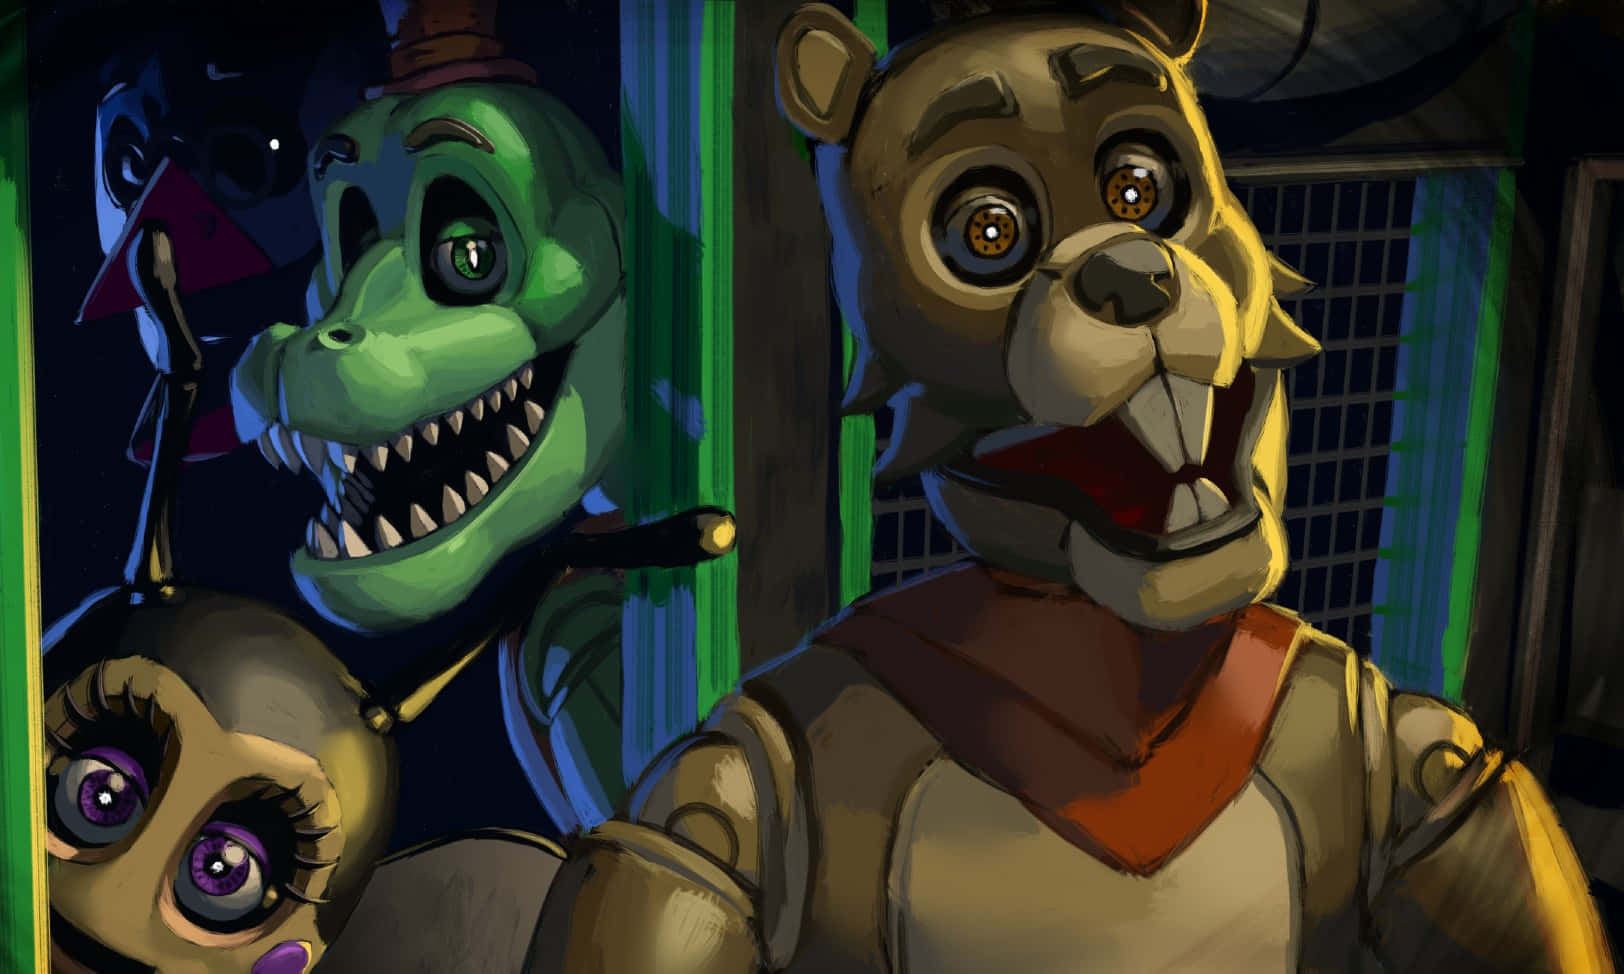 Survive Five Nights At Freddy's as you battle off wicked robots